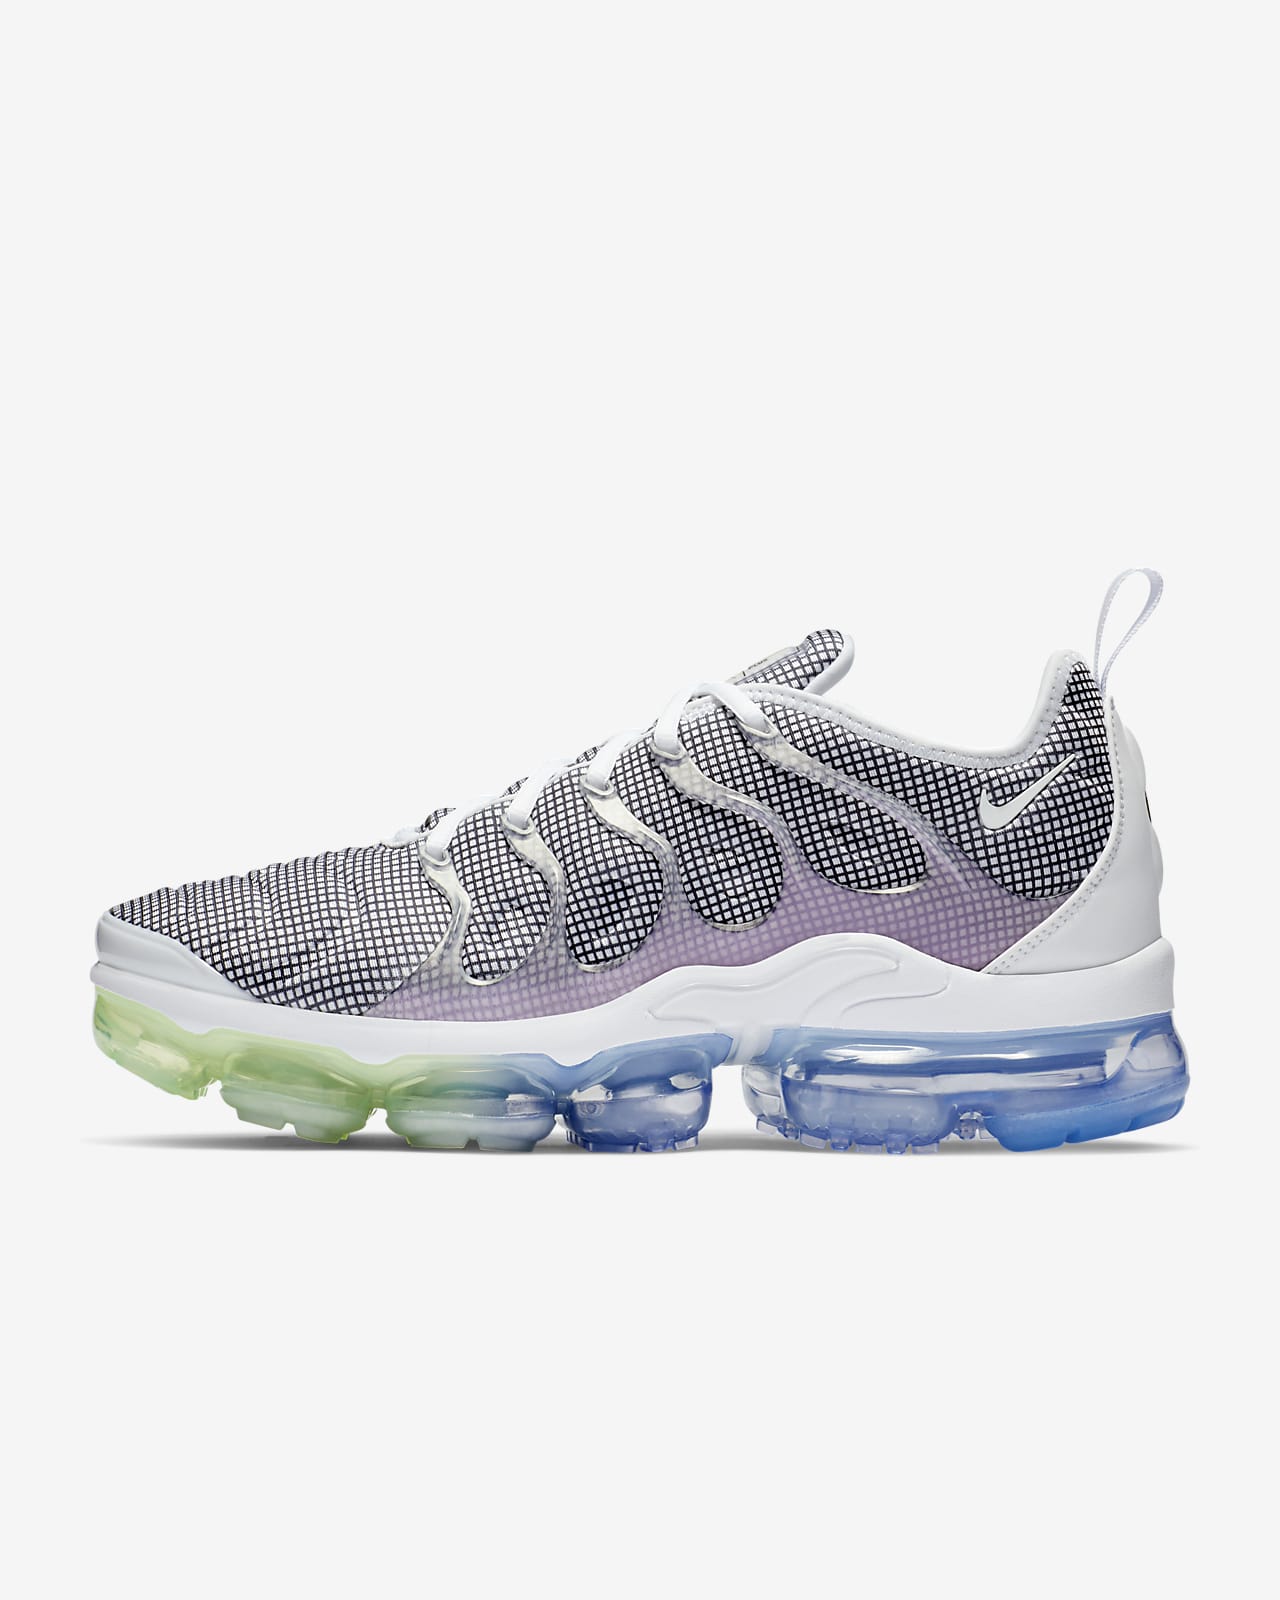 nike vapormax plus in stores